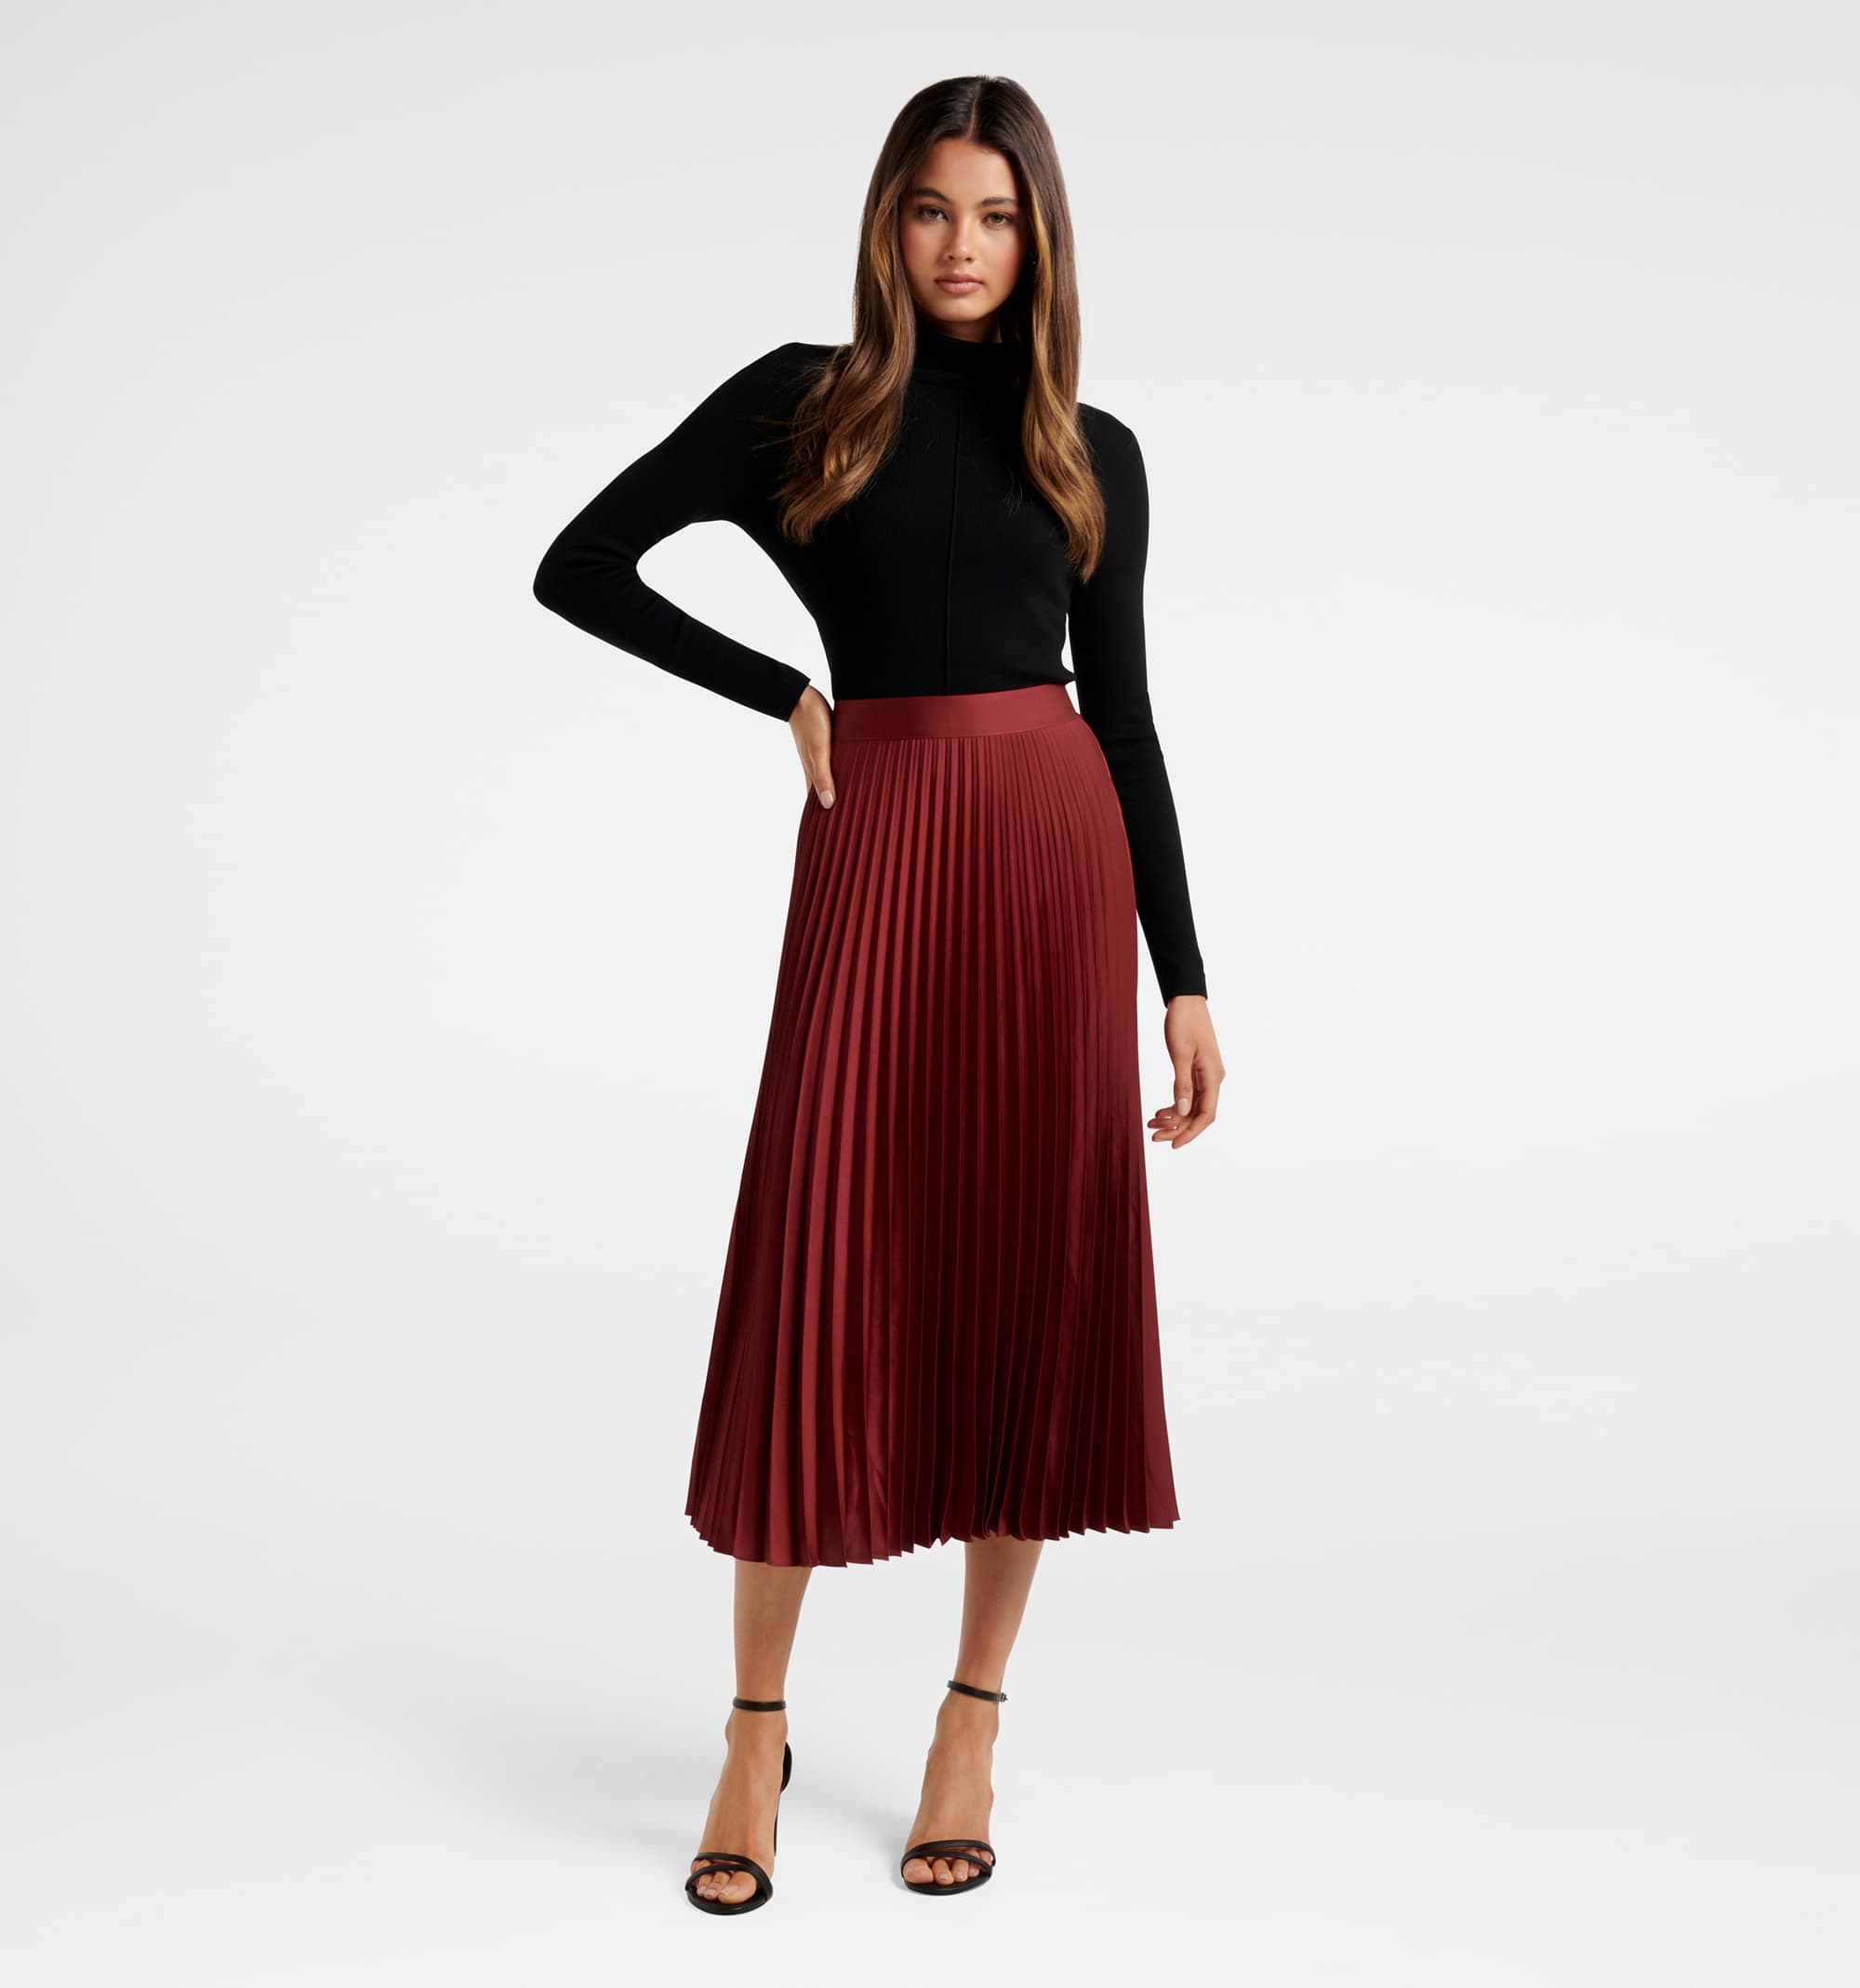 Forever New - Spinning Around: Elegant pleated midi skirts in classic tones  like taupe work back with statement knitwear and tops. Shop the Britton  Cold Shoulder Knit Jumper and Ester Sati Pleated